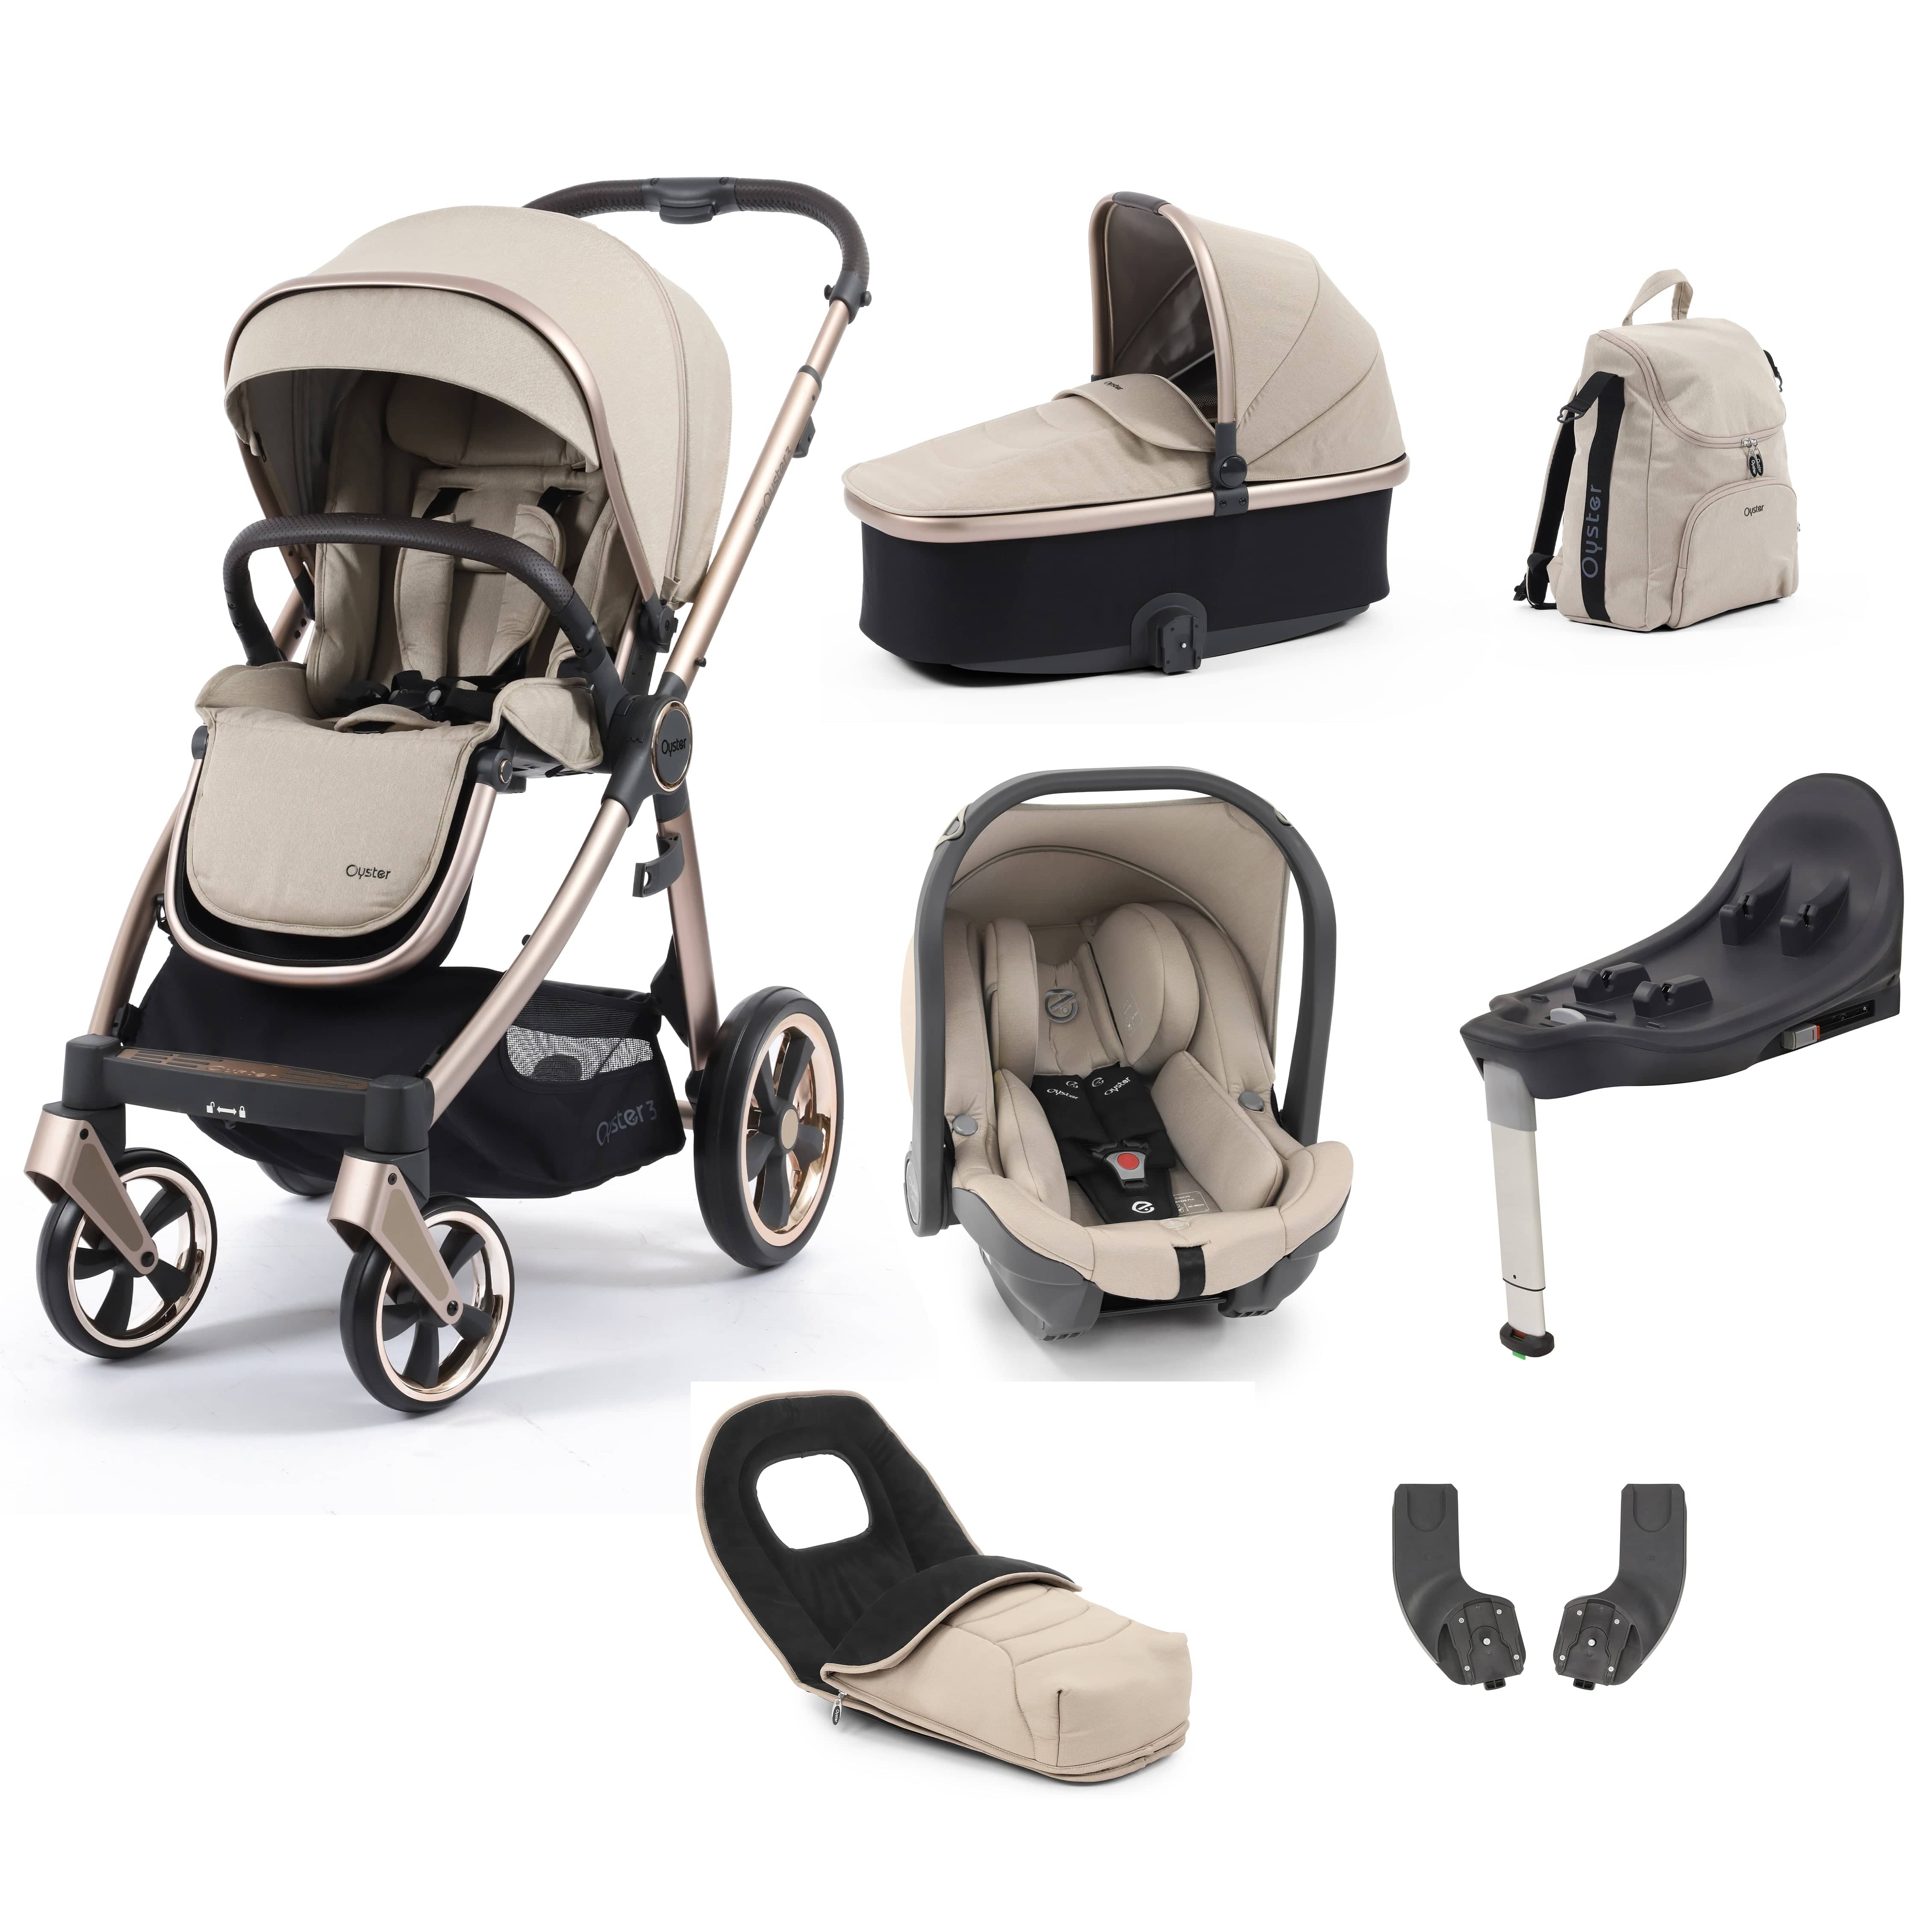 BabyStyle travel systems Babystyle Oyster 3 Luxury 7 Piece with Car Seat Bundle in Creme Brulee 14770-CMB